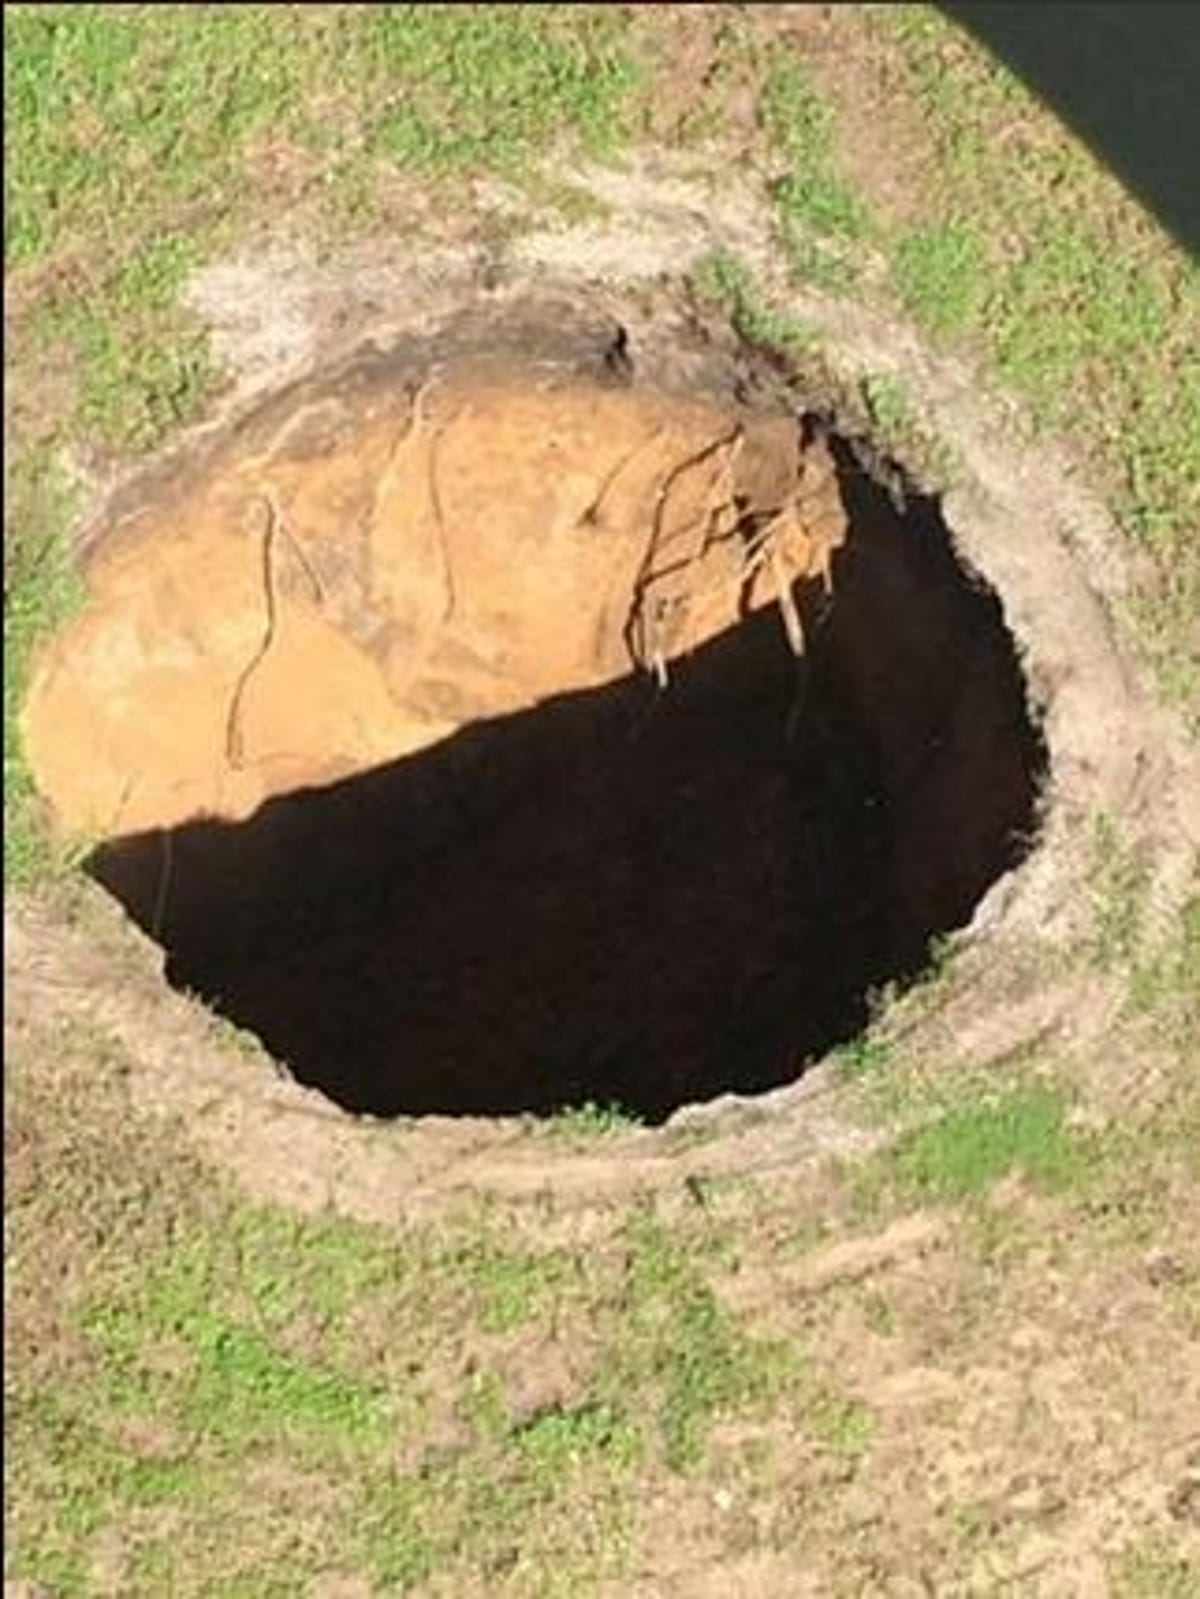 Sinkhole That Swallowed Florida Man Reopens In Seffner